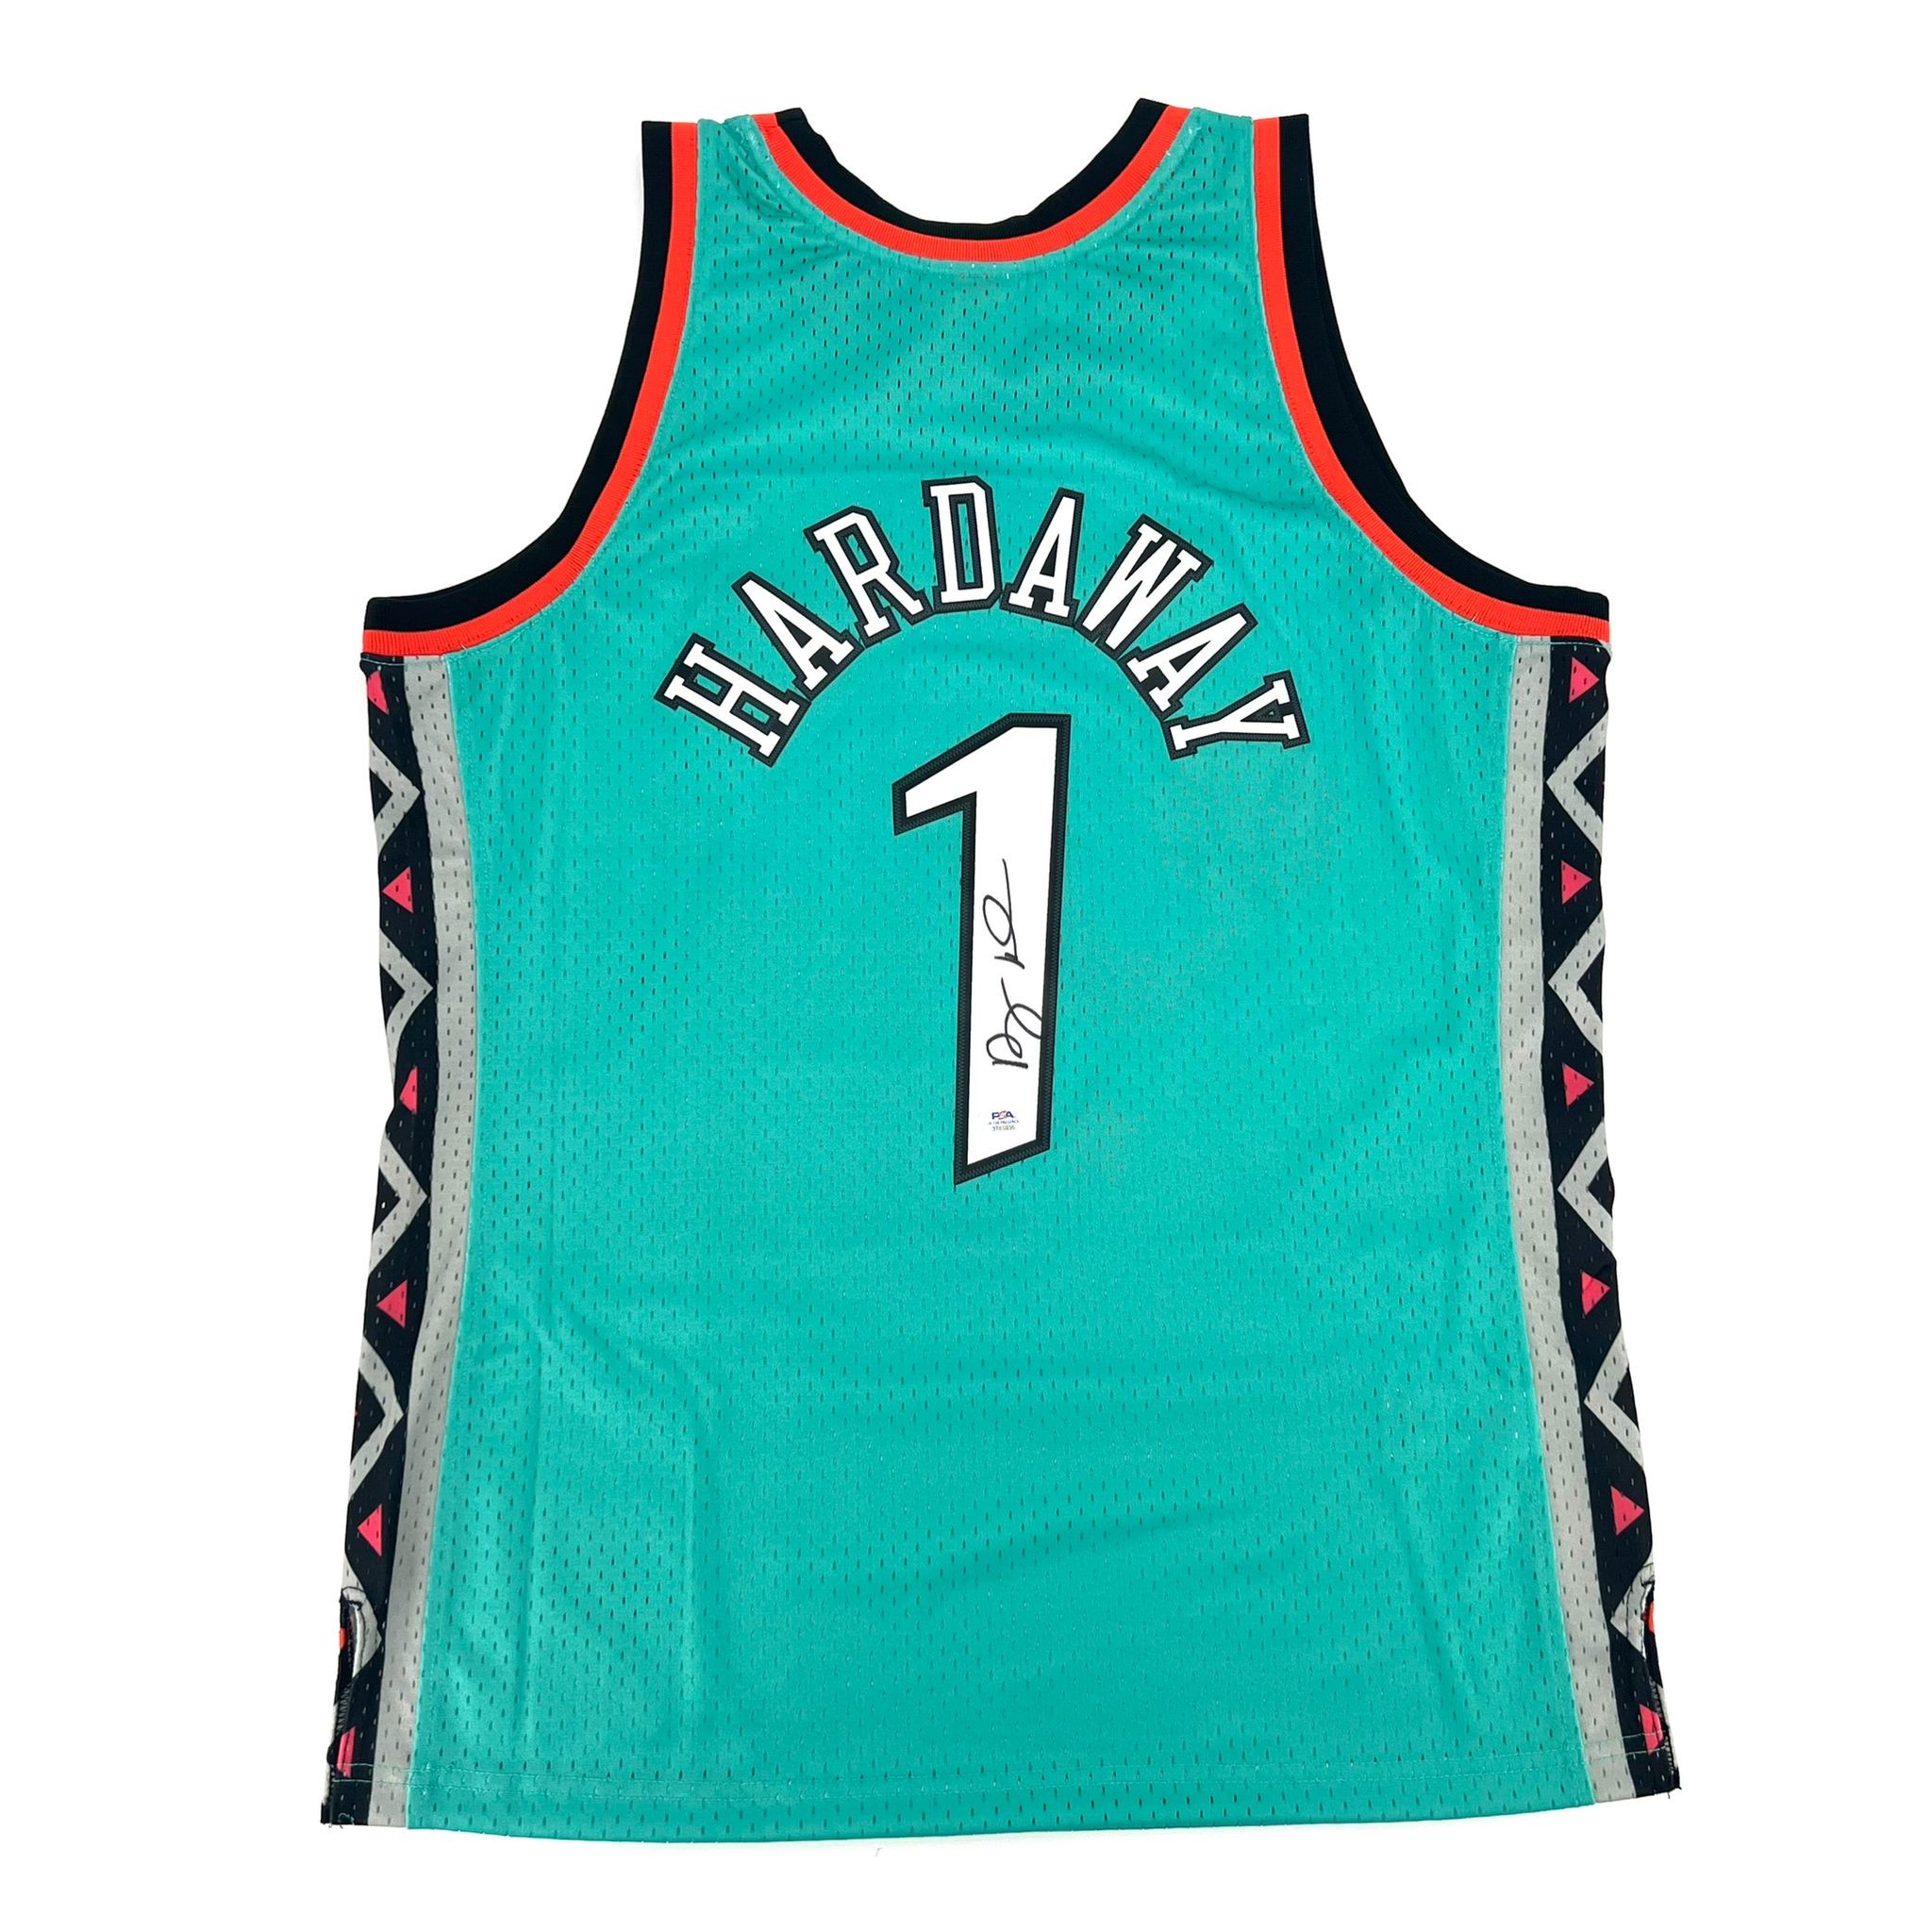 Men's 1996 NBA All-Star Game Penny Hardaway Mitchell & Ness Teal